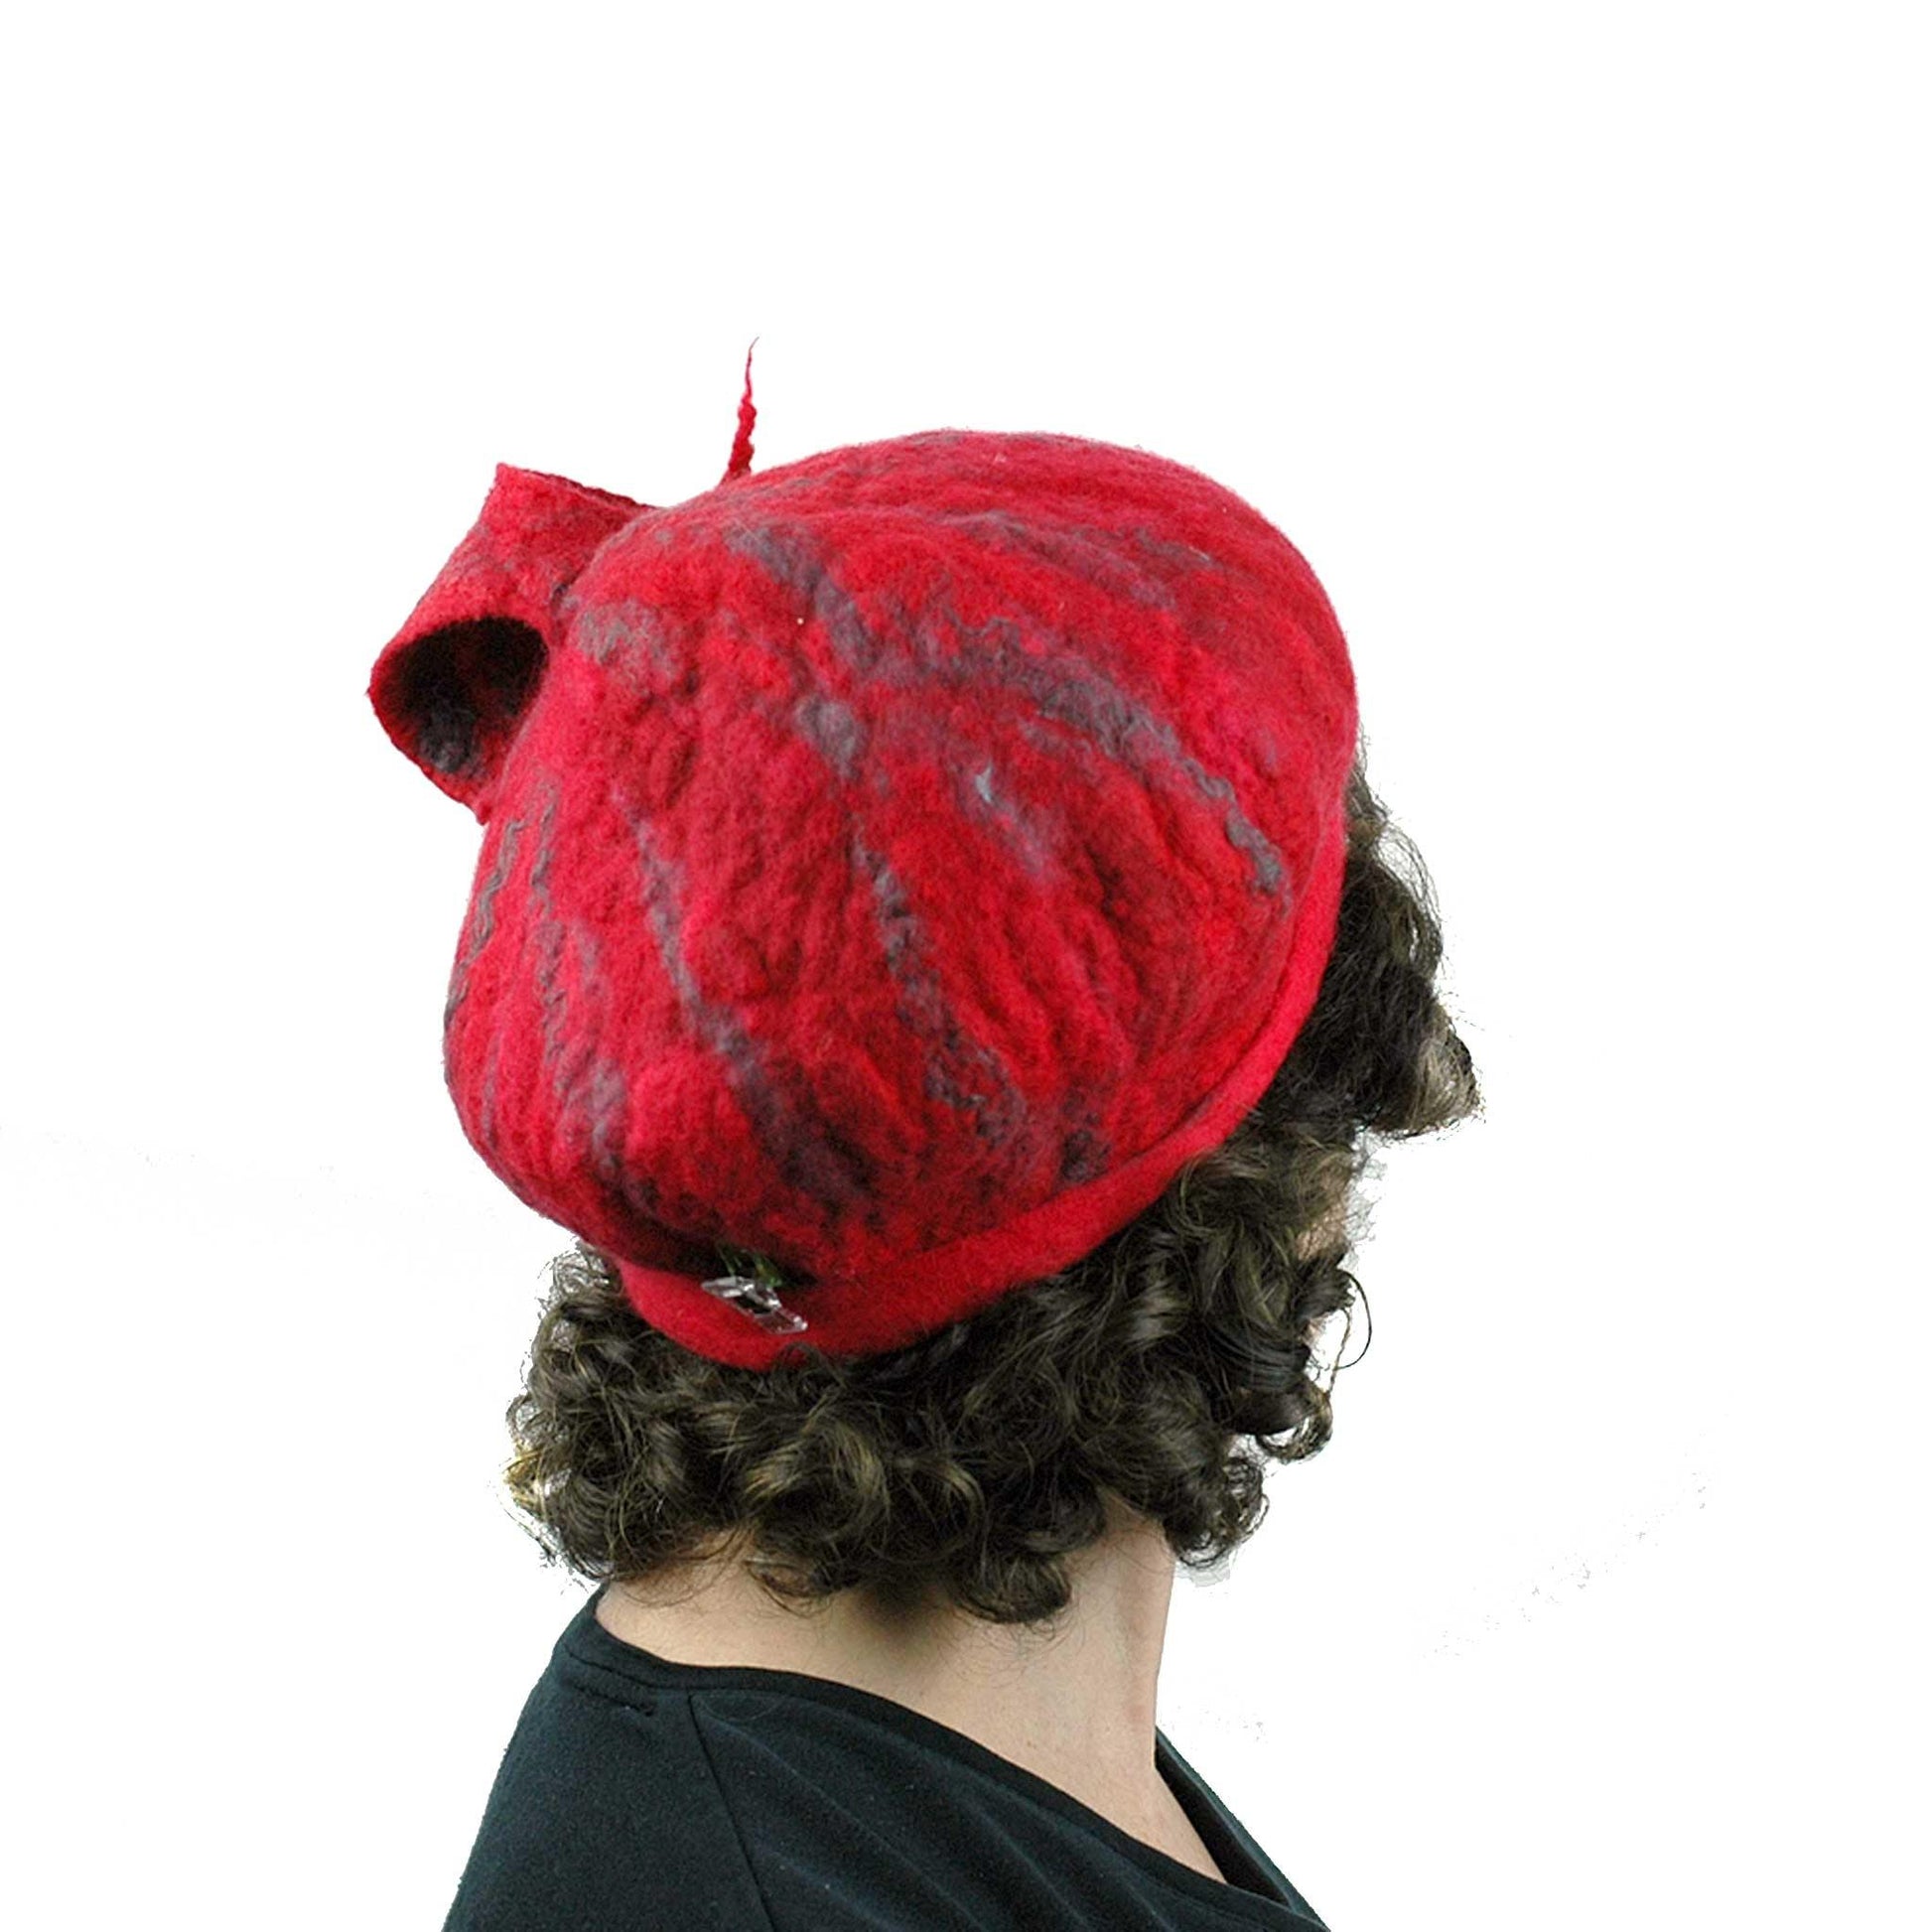 Fishtail Hat in Red with Gray Stripes - bacl view